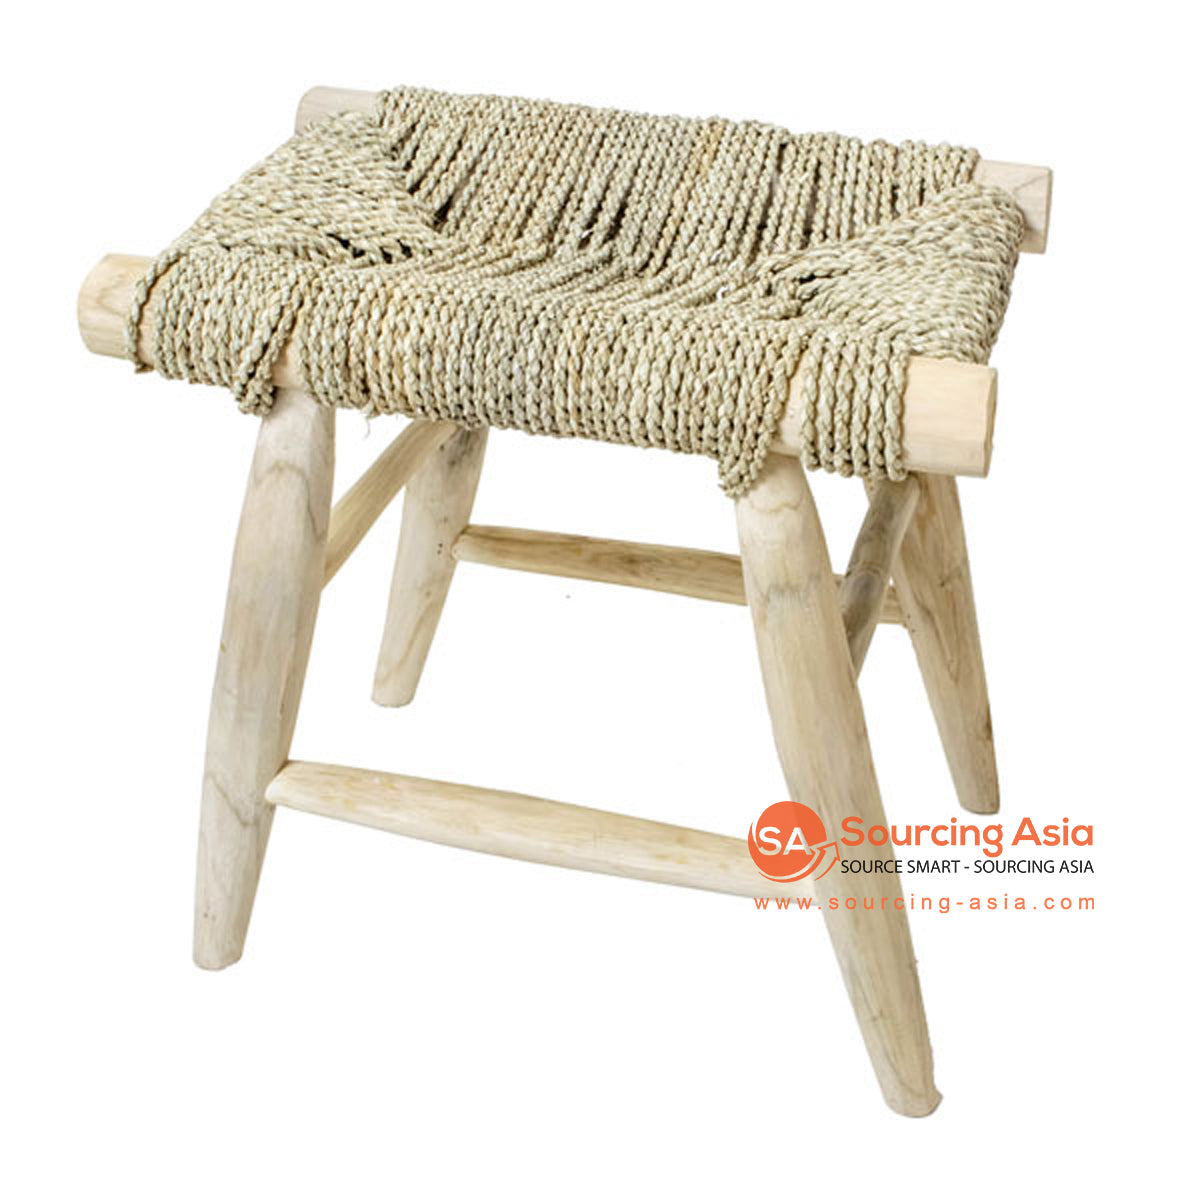 SHL180-2 NATURAL TEAK WOOD STOOL WITH SEAGRASS SEAT